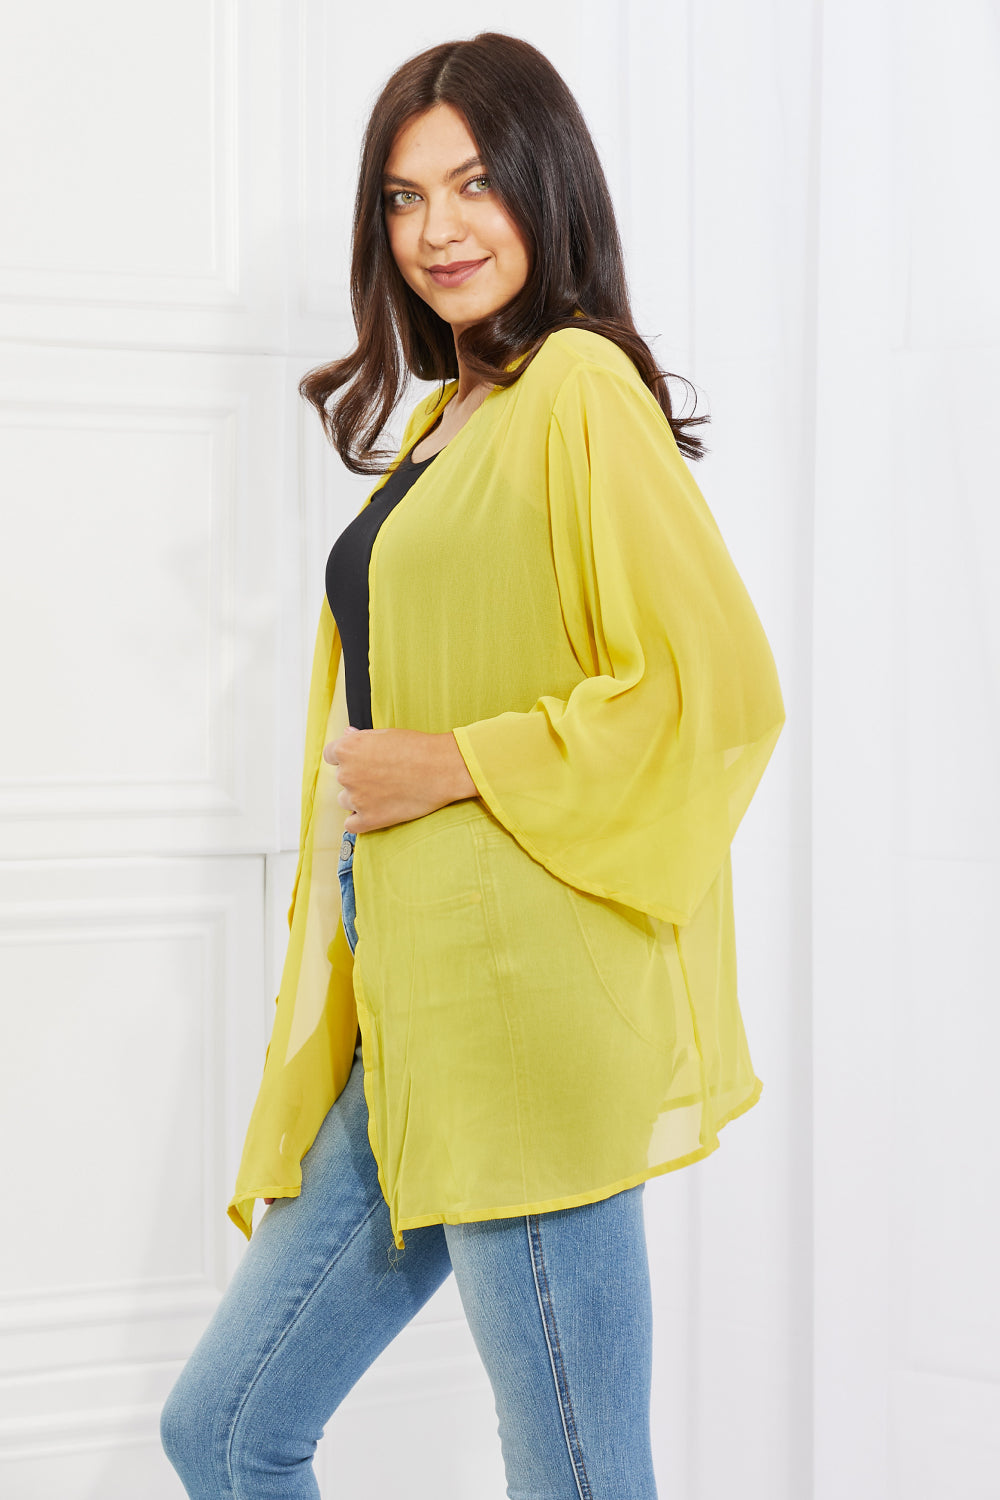 Melody Just Breathe Full Size Chiffon Kimono in Yellow-Cardigans-Inspired by Justeen-Women's Clothing Boutique in Chicago, Illinois